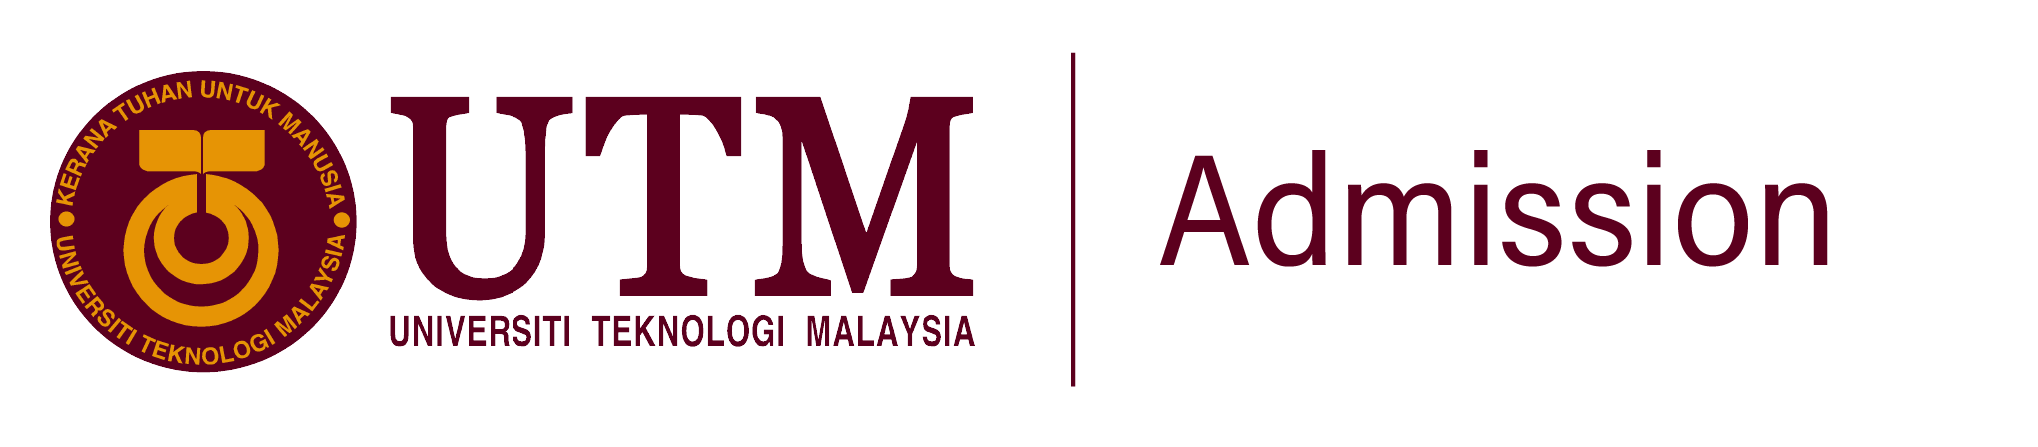 phd by coursework in malaysia